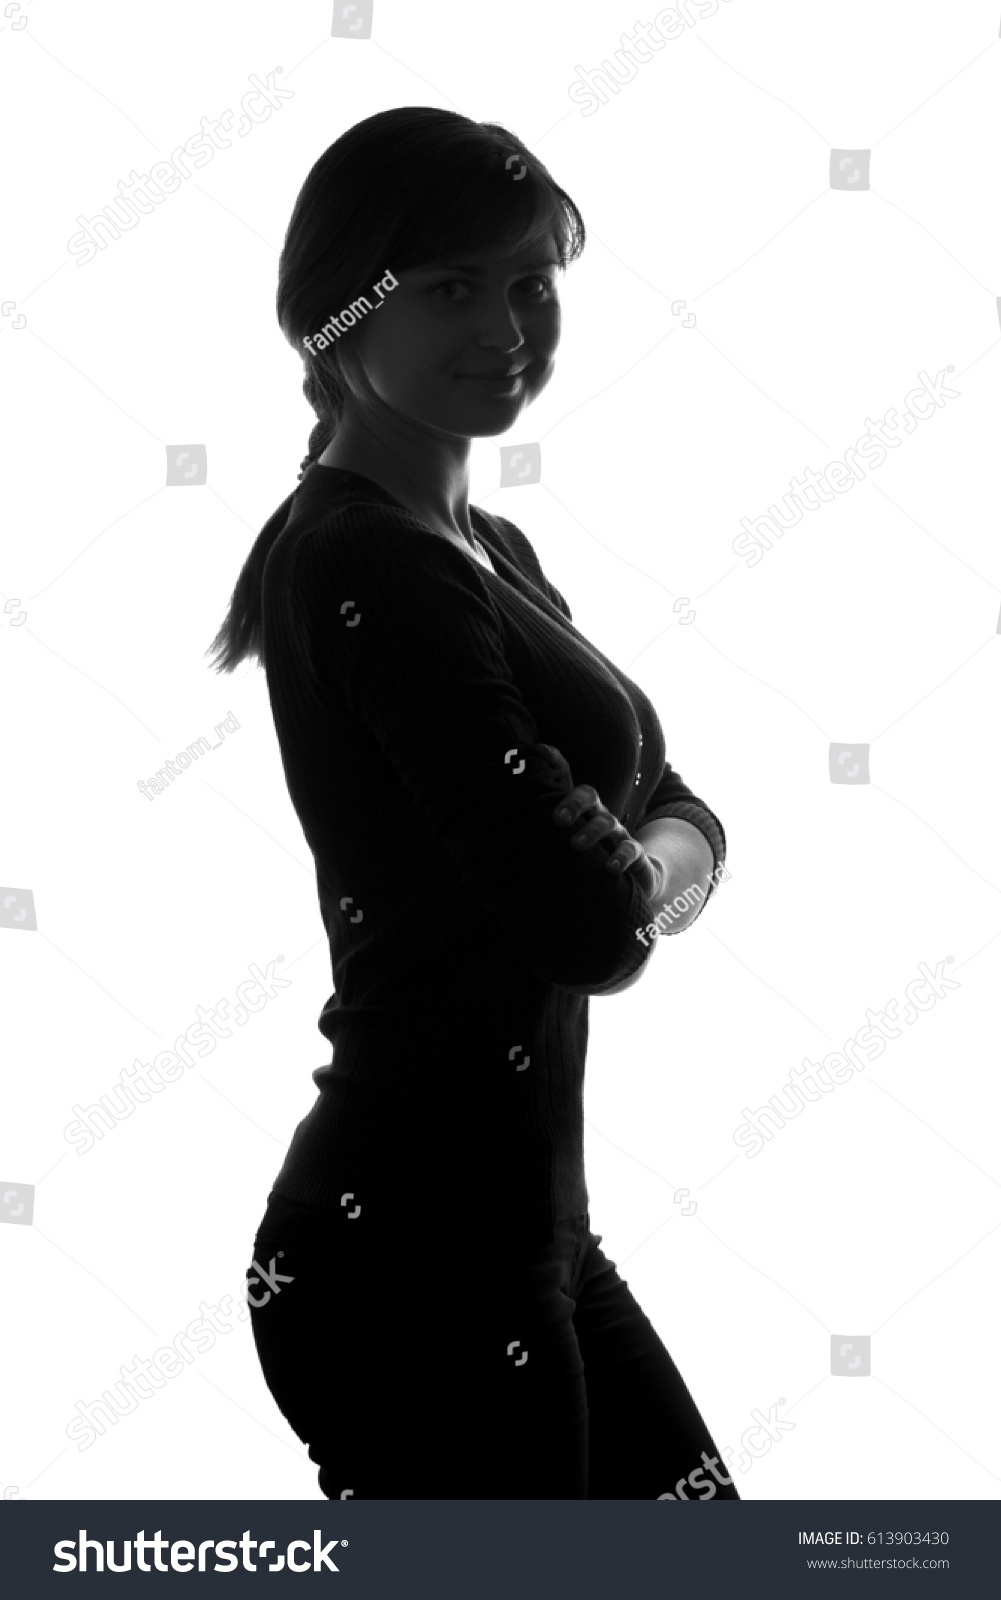 Black and white silhouette portrait of a young confident female with her arms folded over her chest #613903430